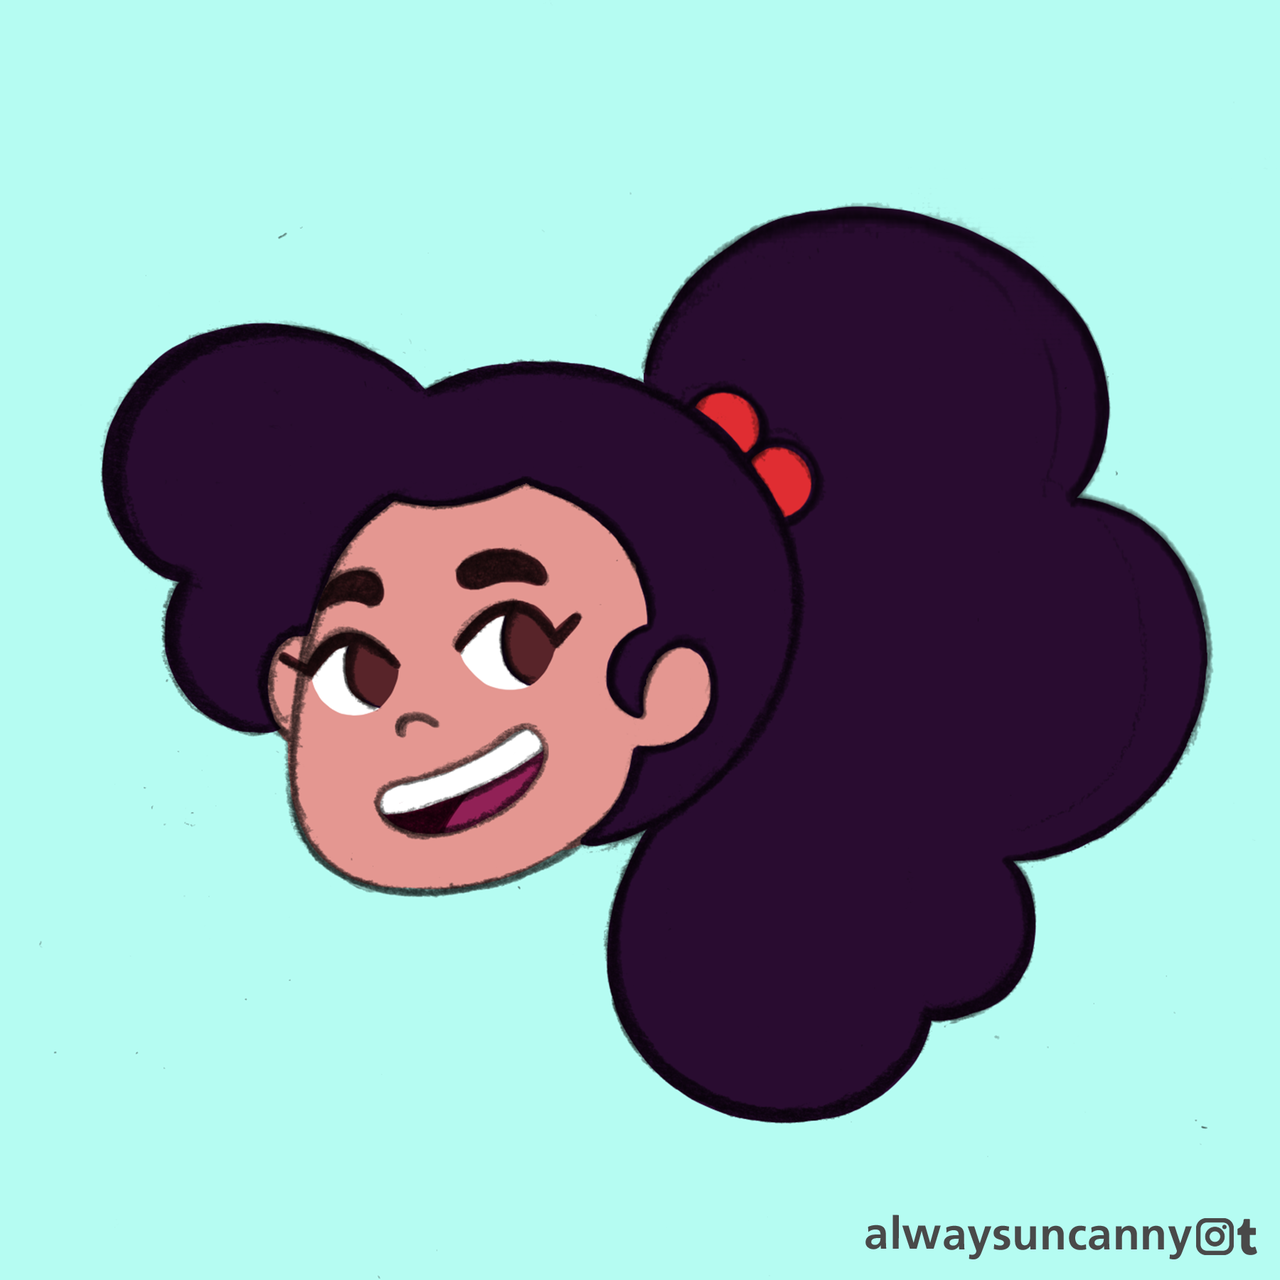 A little Stevonnie doodle, need to watch the new episodes more random fan art